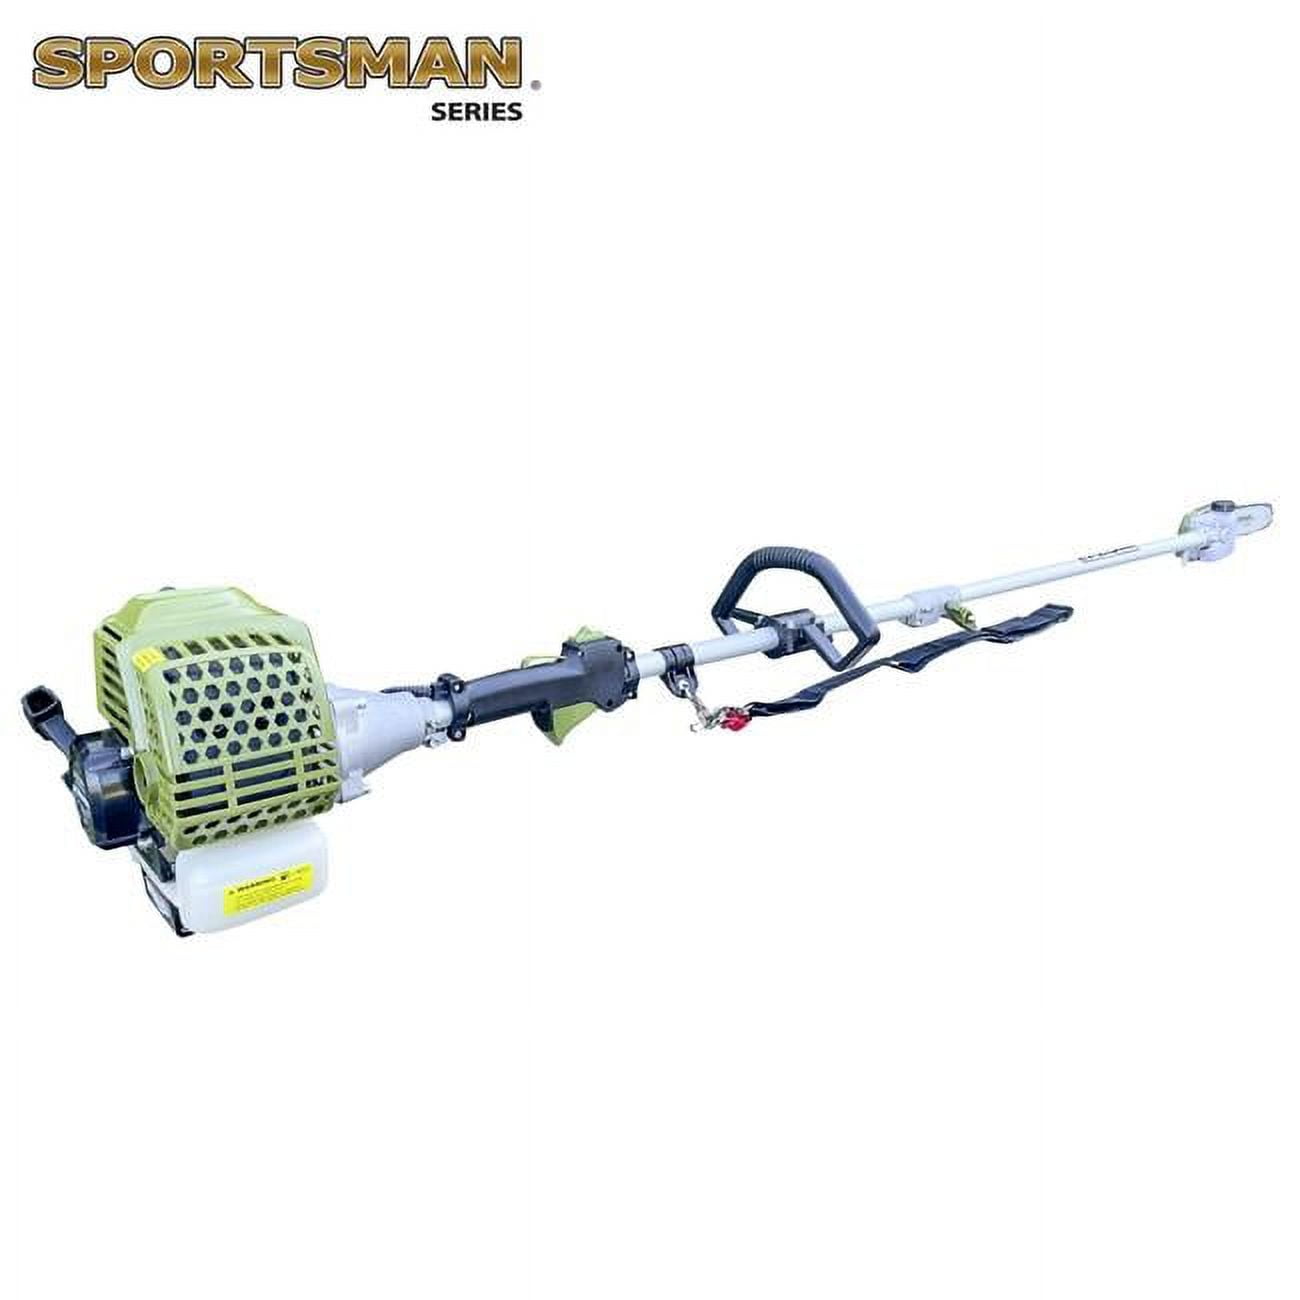 Picture of Sportsman Series GPSHT32 Gas Pole Saw with Hedge Trimmer, Green